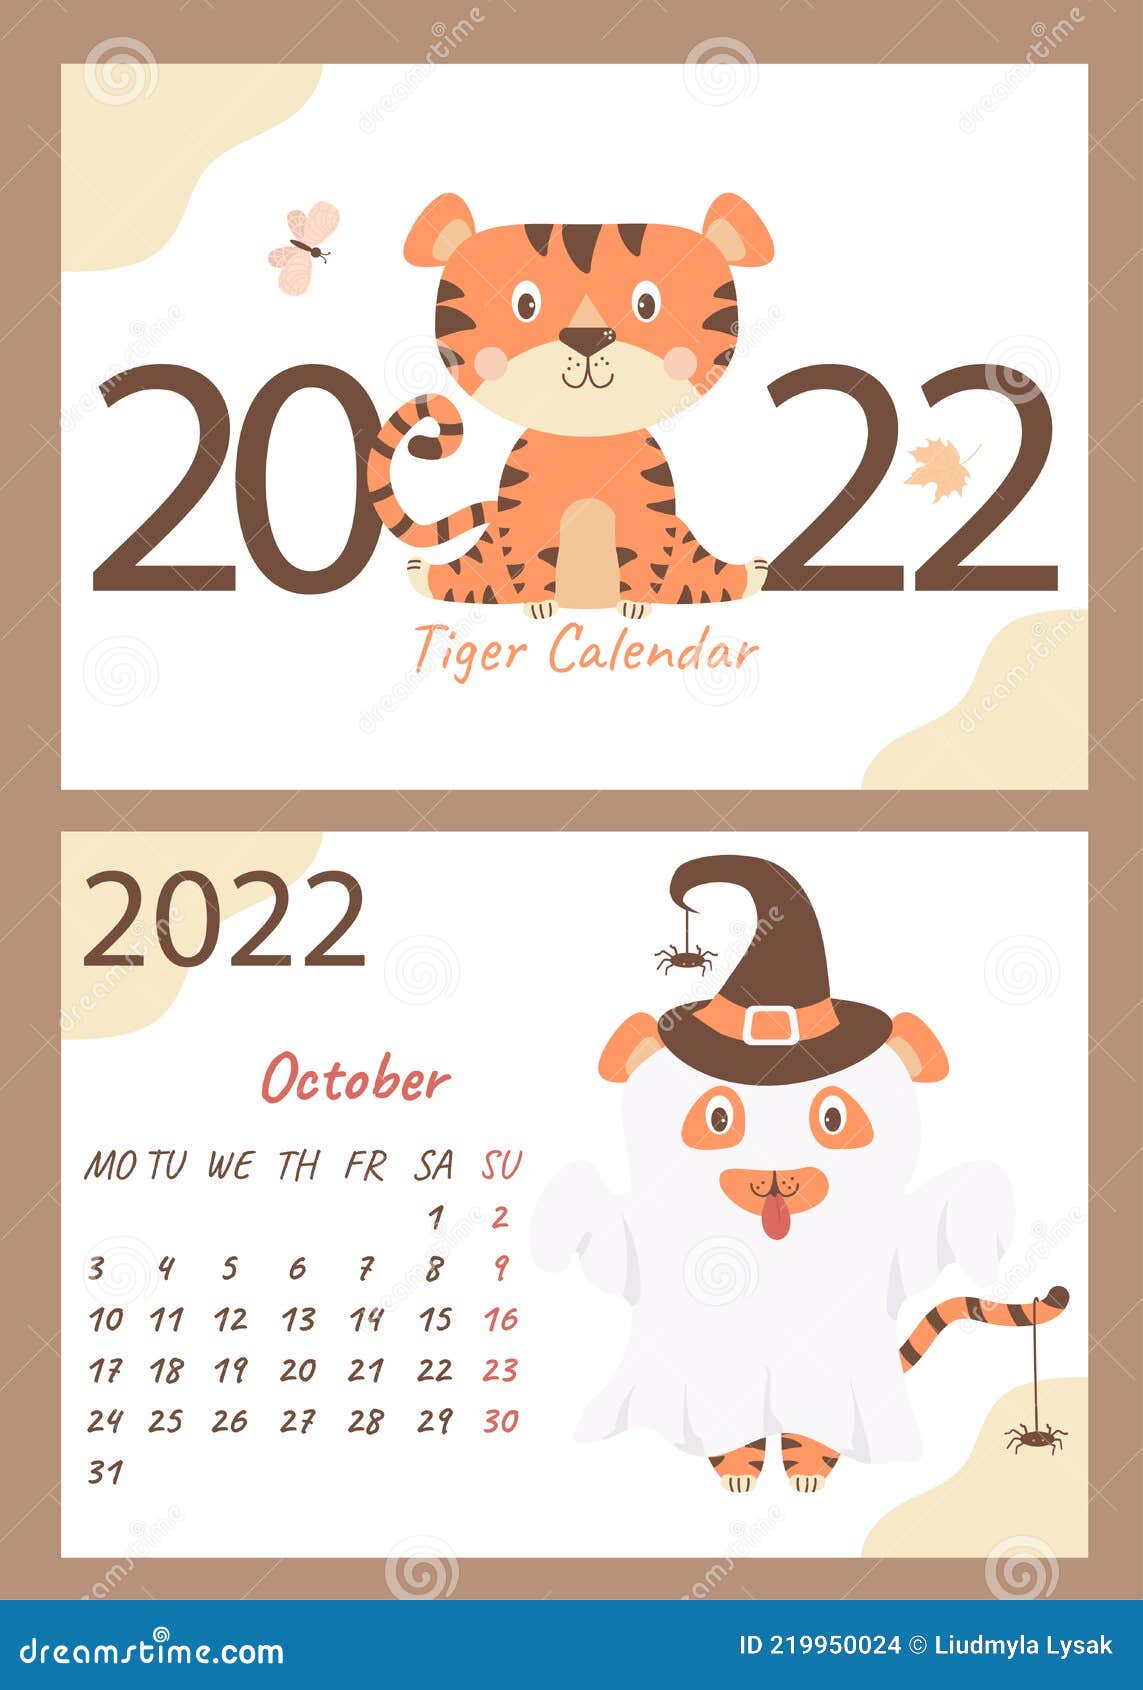 Halloween 2022 Calendar Set - October 2022 Calendar And Cover. Cute Ghost Tiger In A Hat With  Spiders, Halloween Holiday. Horizontal A4 Template. Week Stock Vector -  Illustration Of Novelty, Cute: 219950024